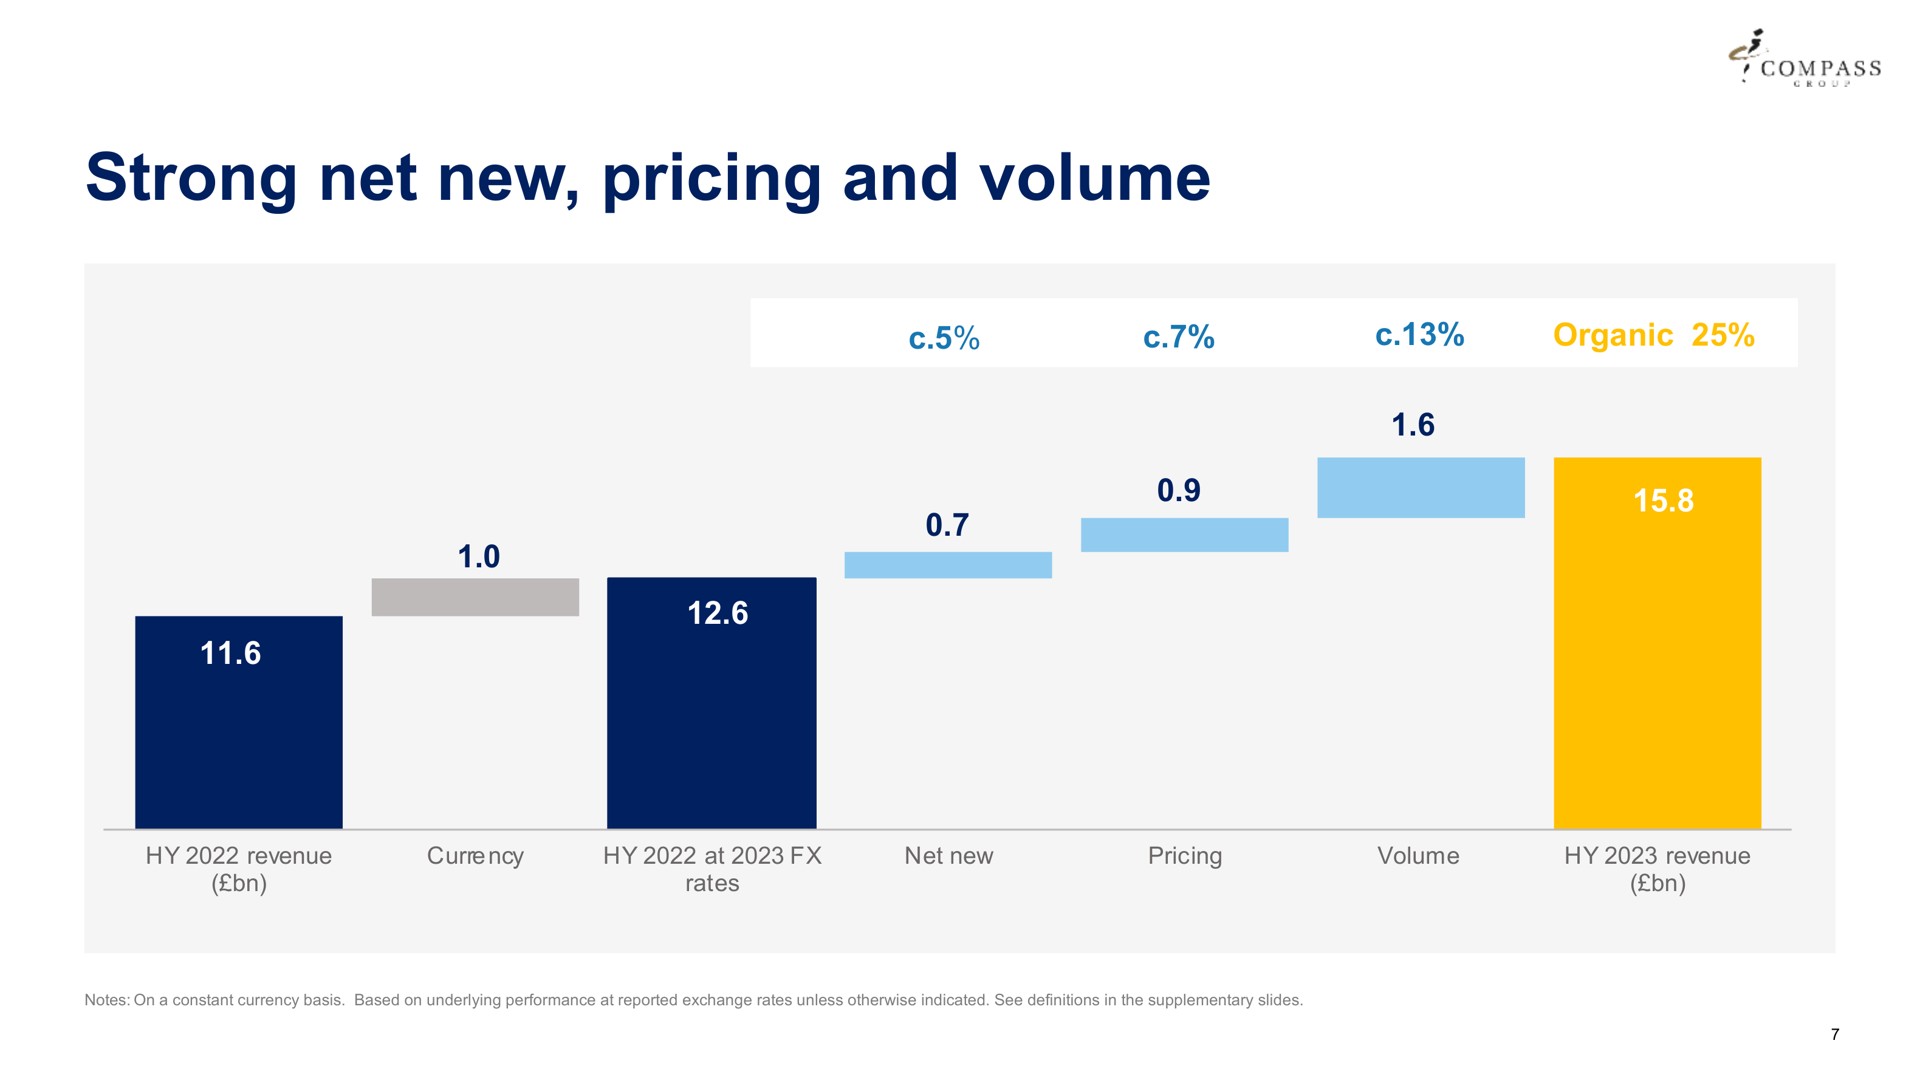 strong net new pricing and volume rates | Compass Group